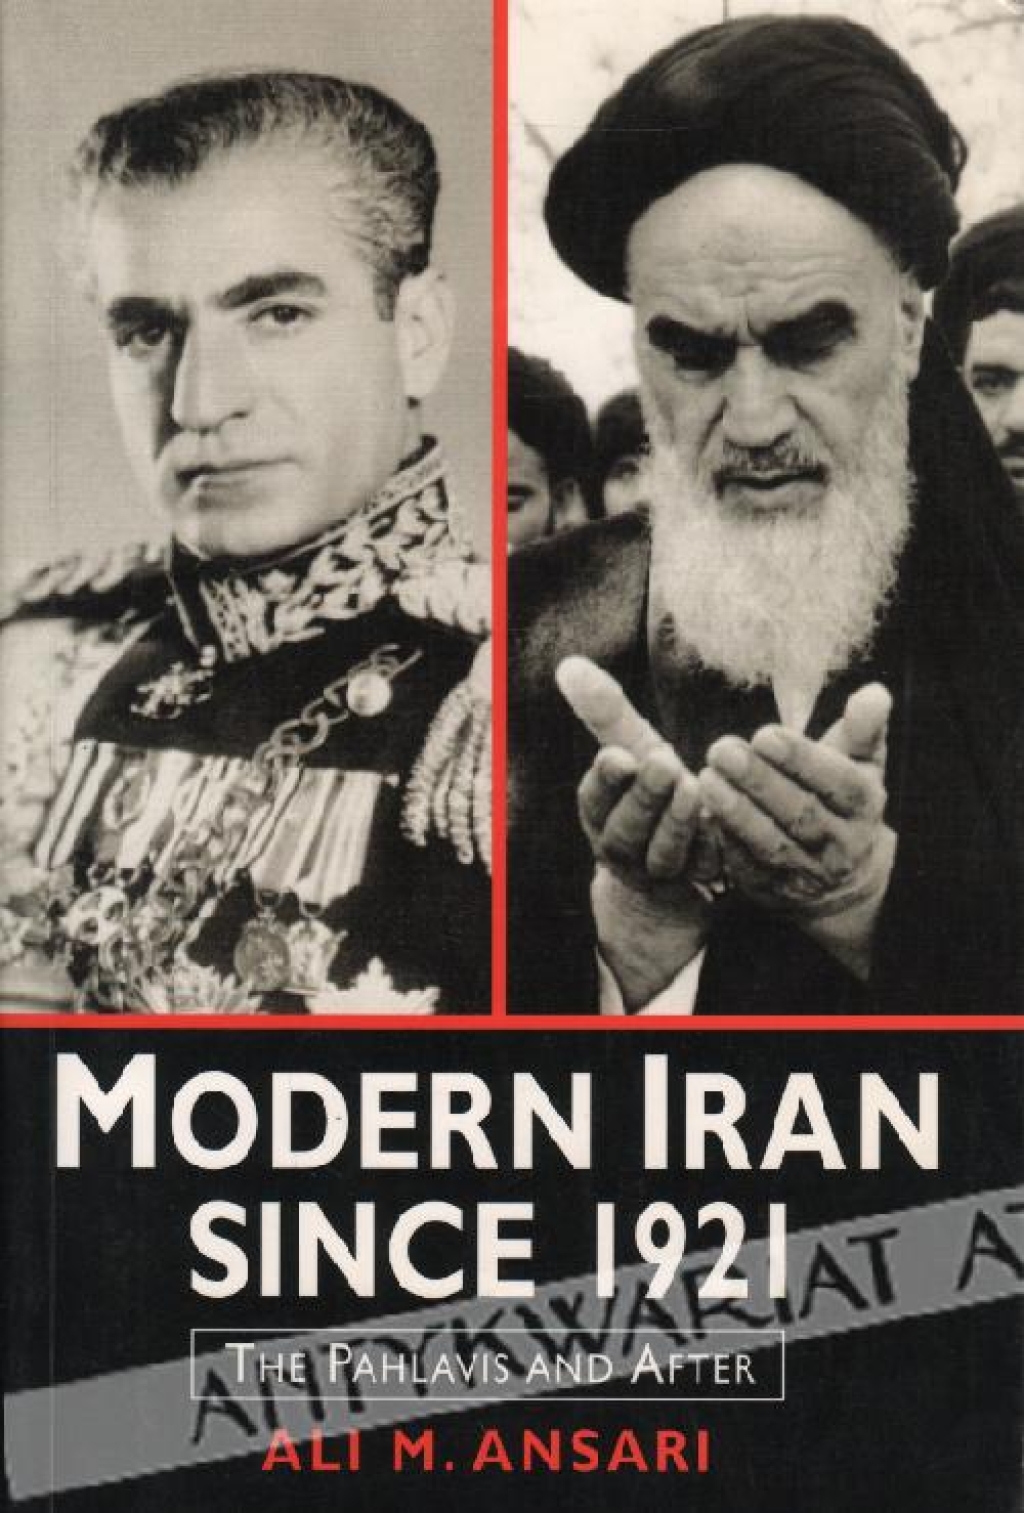 Modern Iran since 1921. The Pahlavis and after